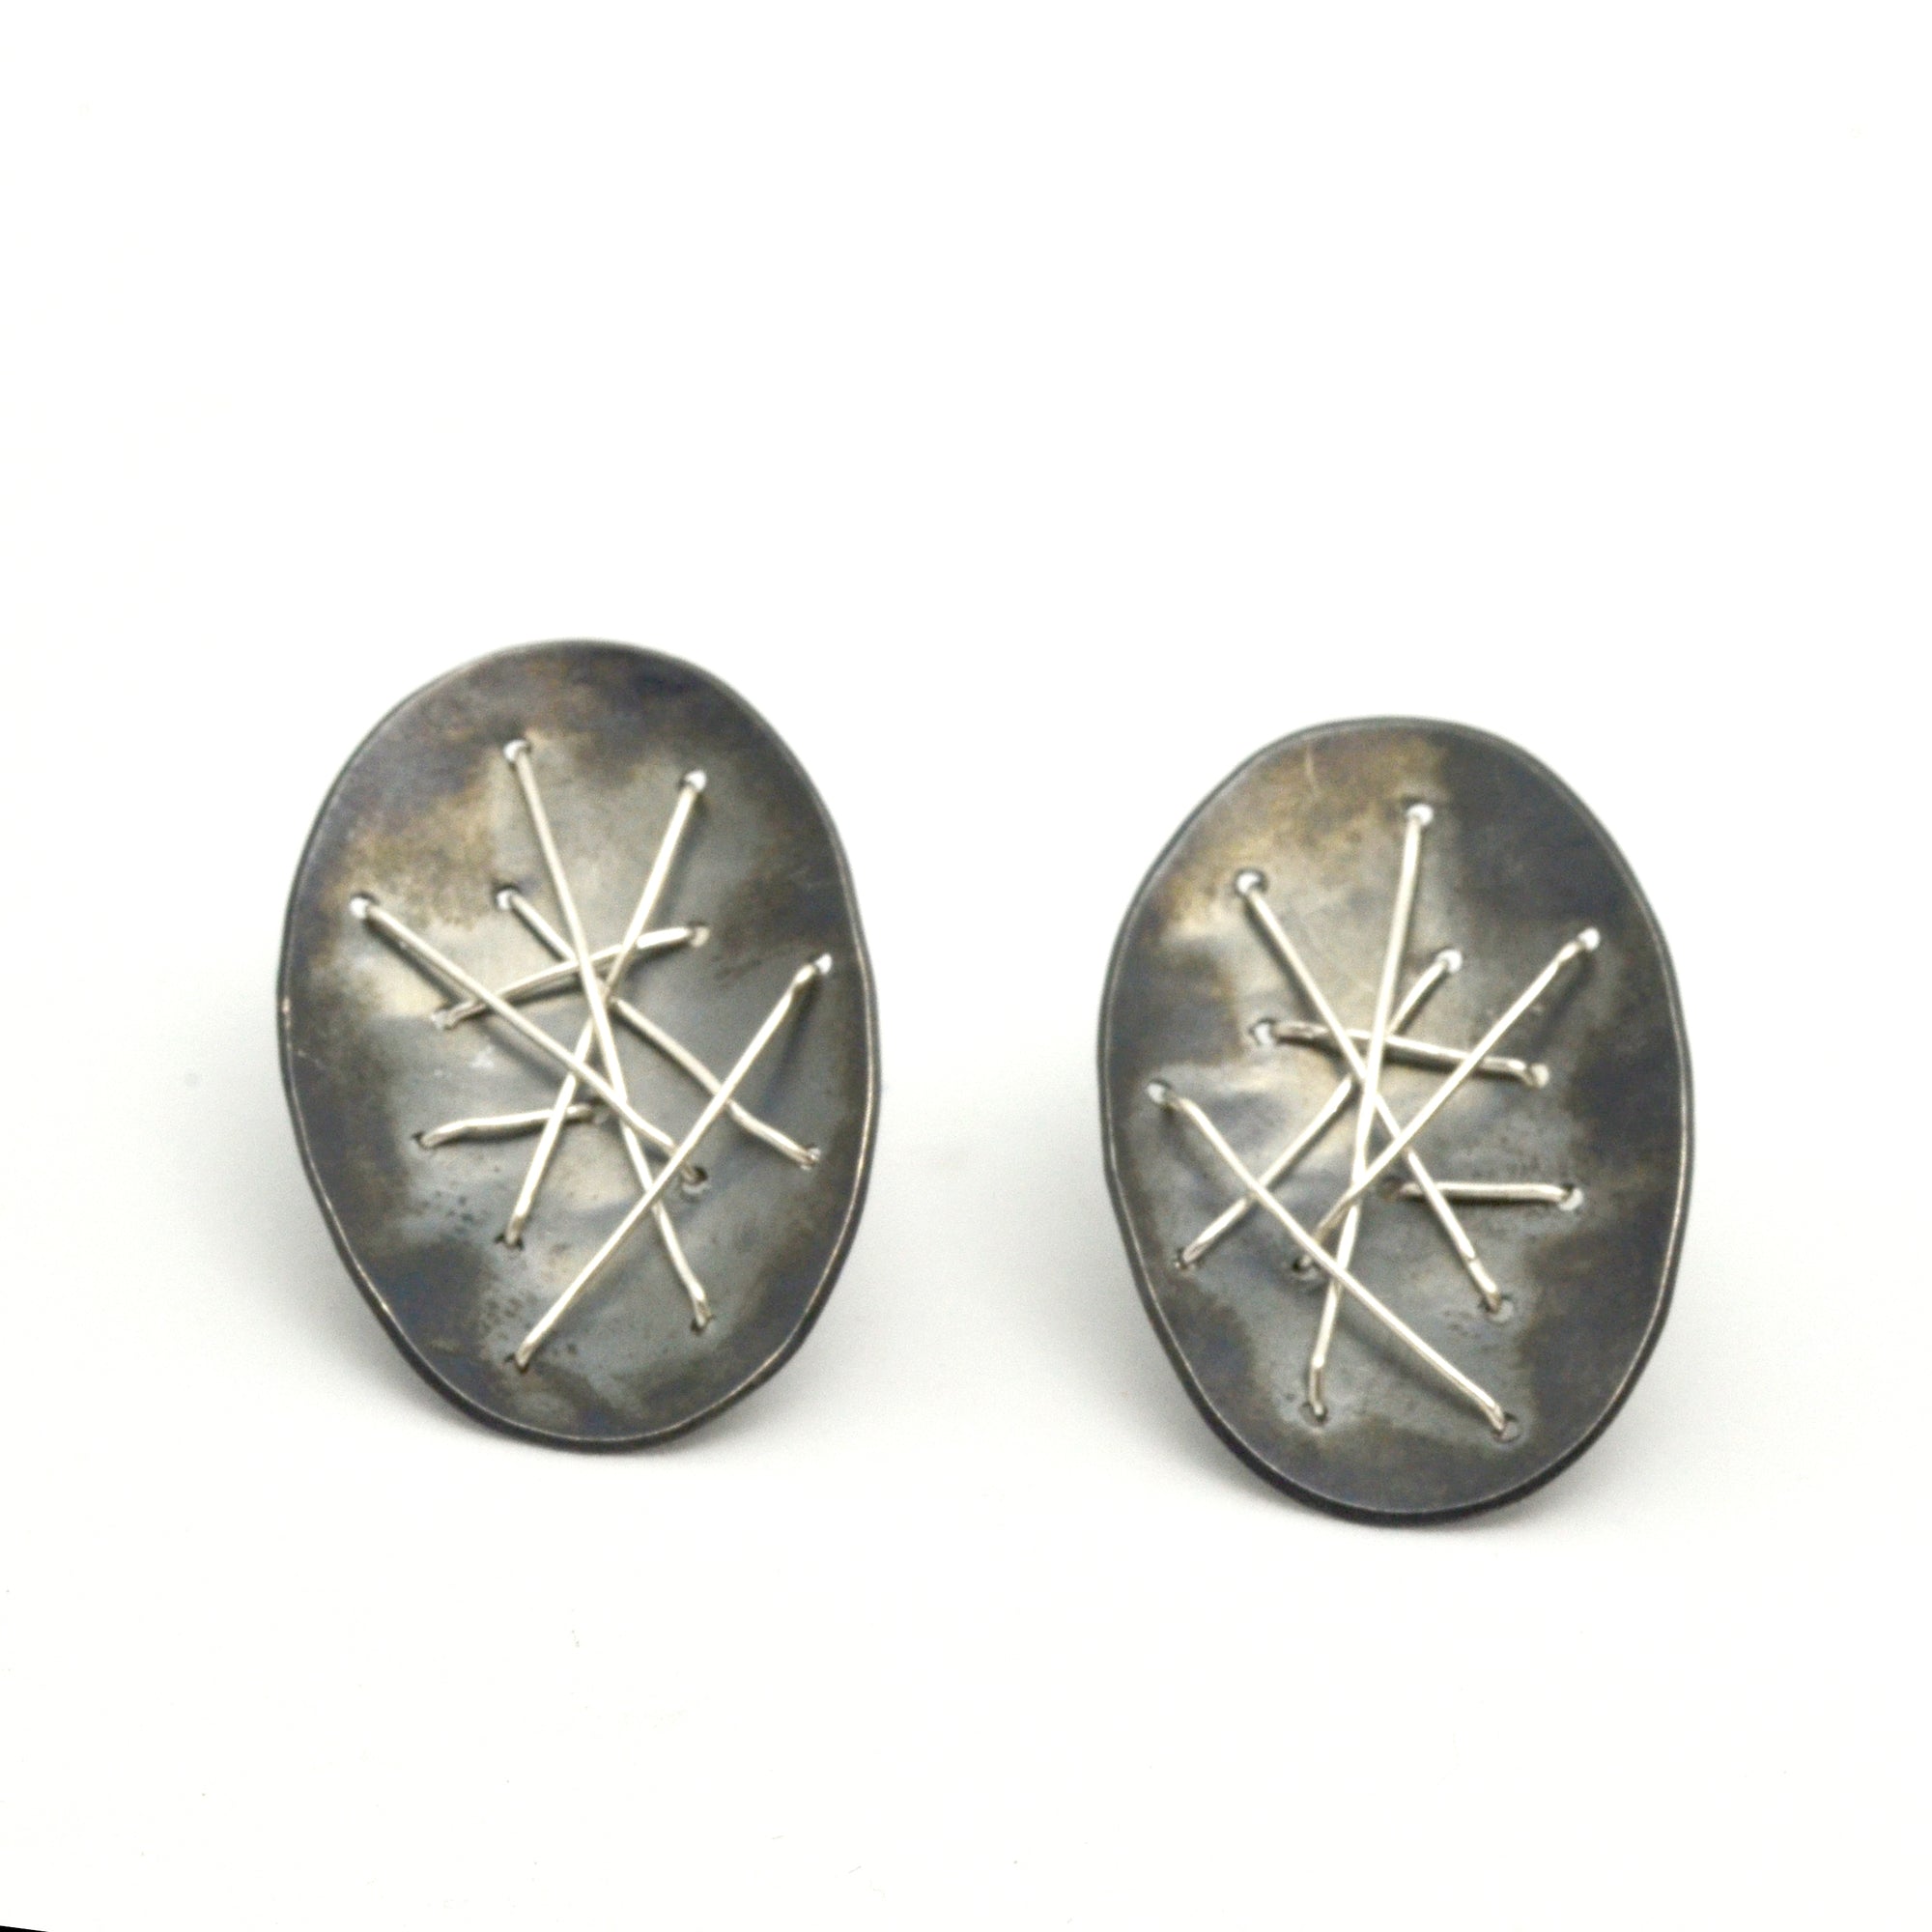 Suzanne Schwartz Freeform Oval Stitched Silver Earrings